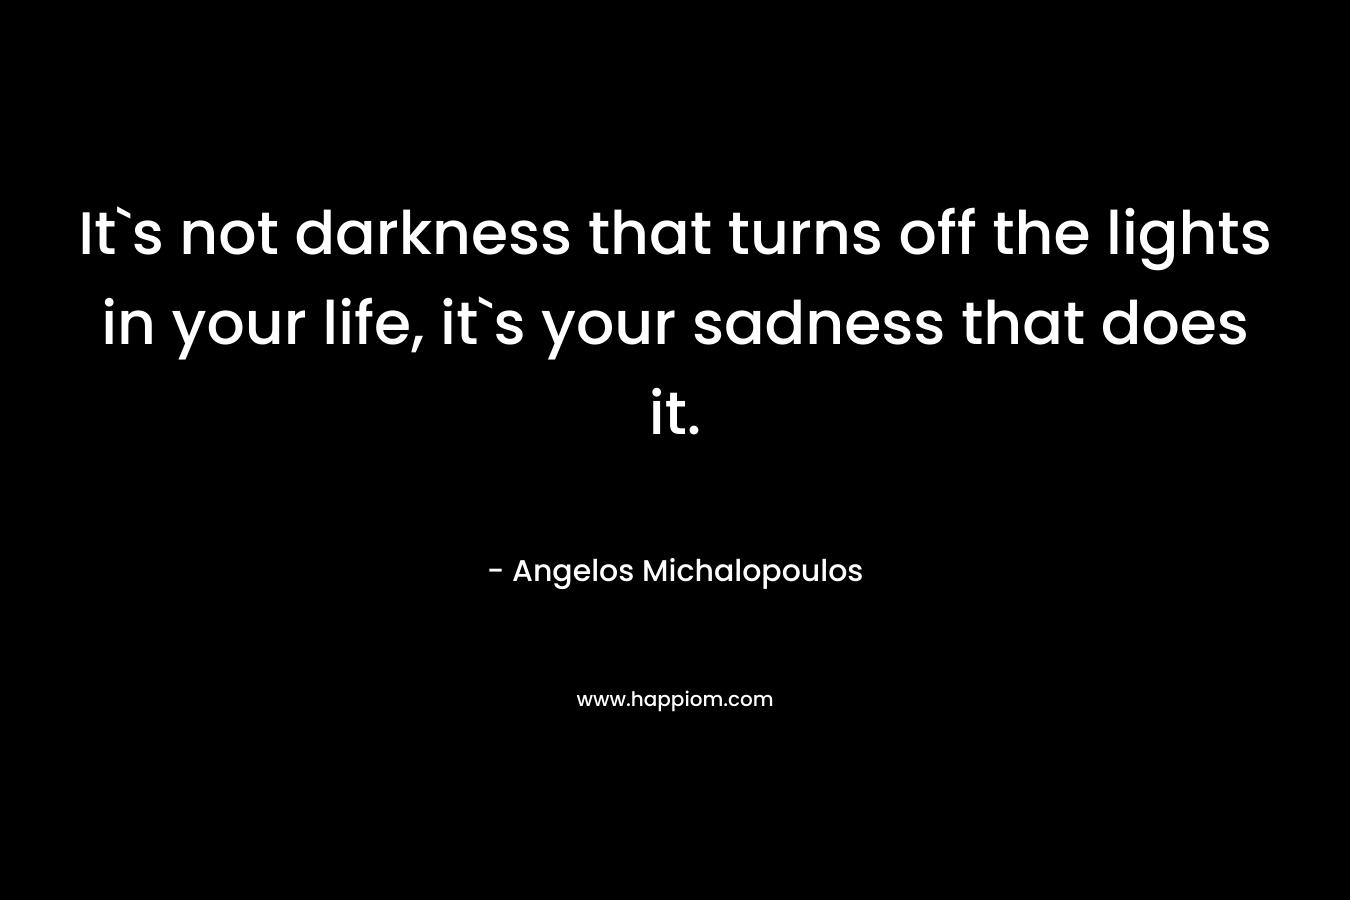 It`s not darkness that turns off the lights in your life, it`s your sadness that does it.